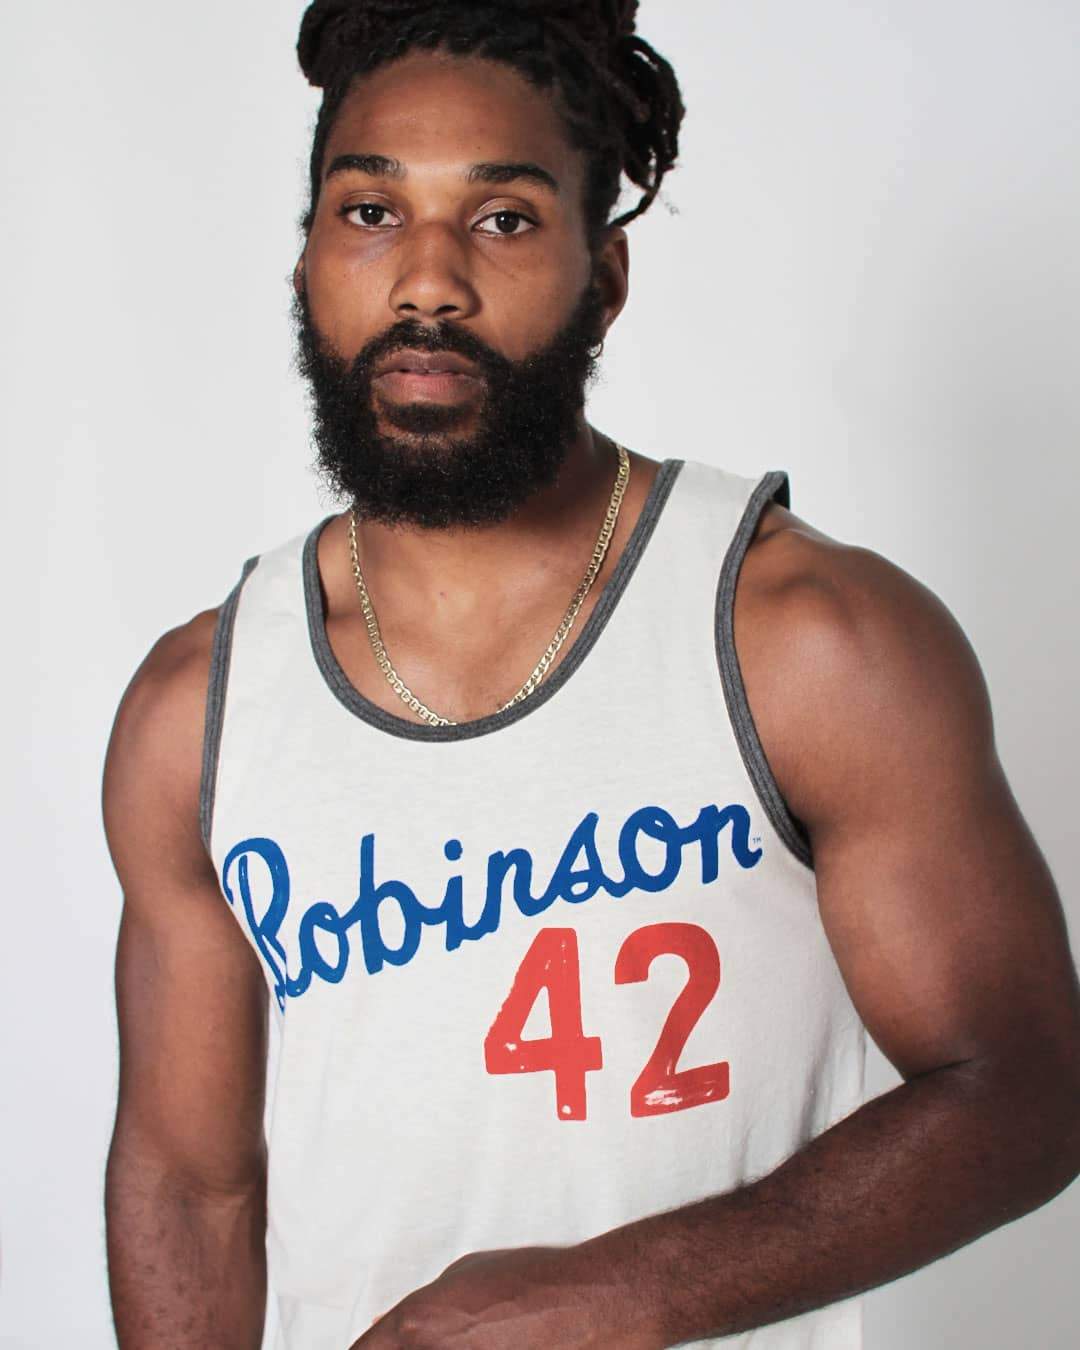 Jackie Robinson 42 Tribute Tank - Roots of Inc dba Roots of Fight